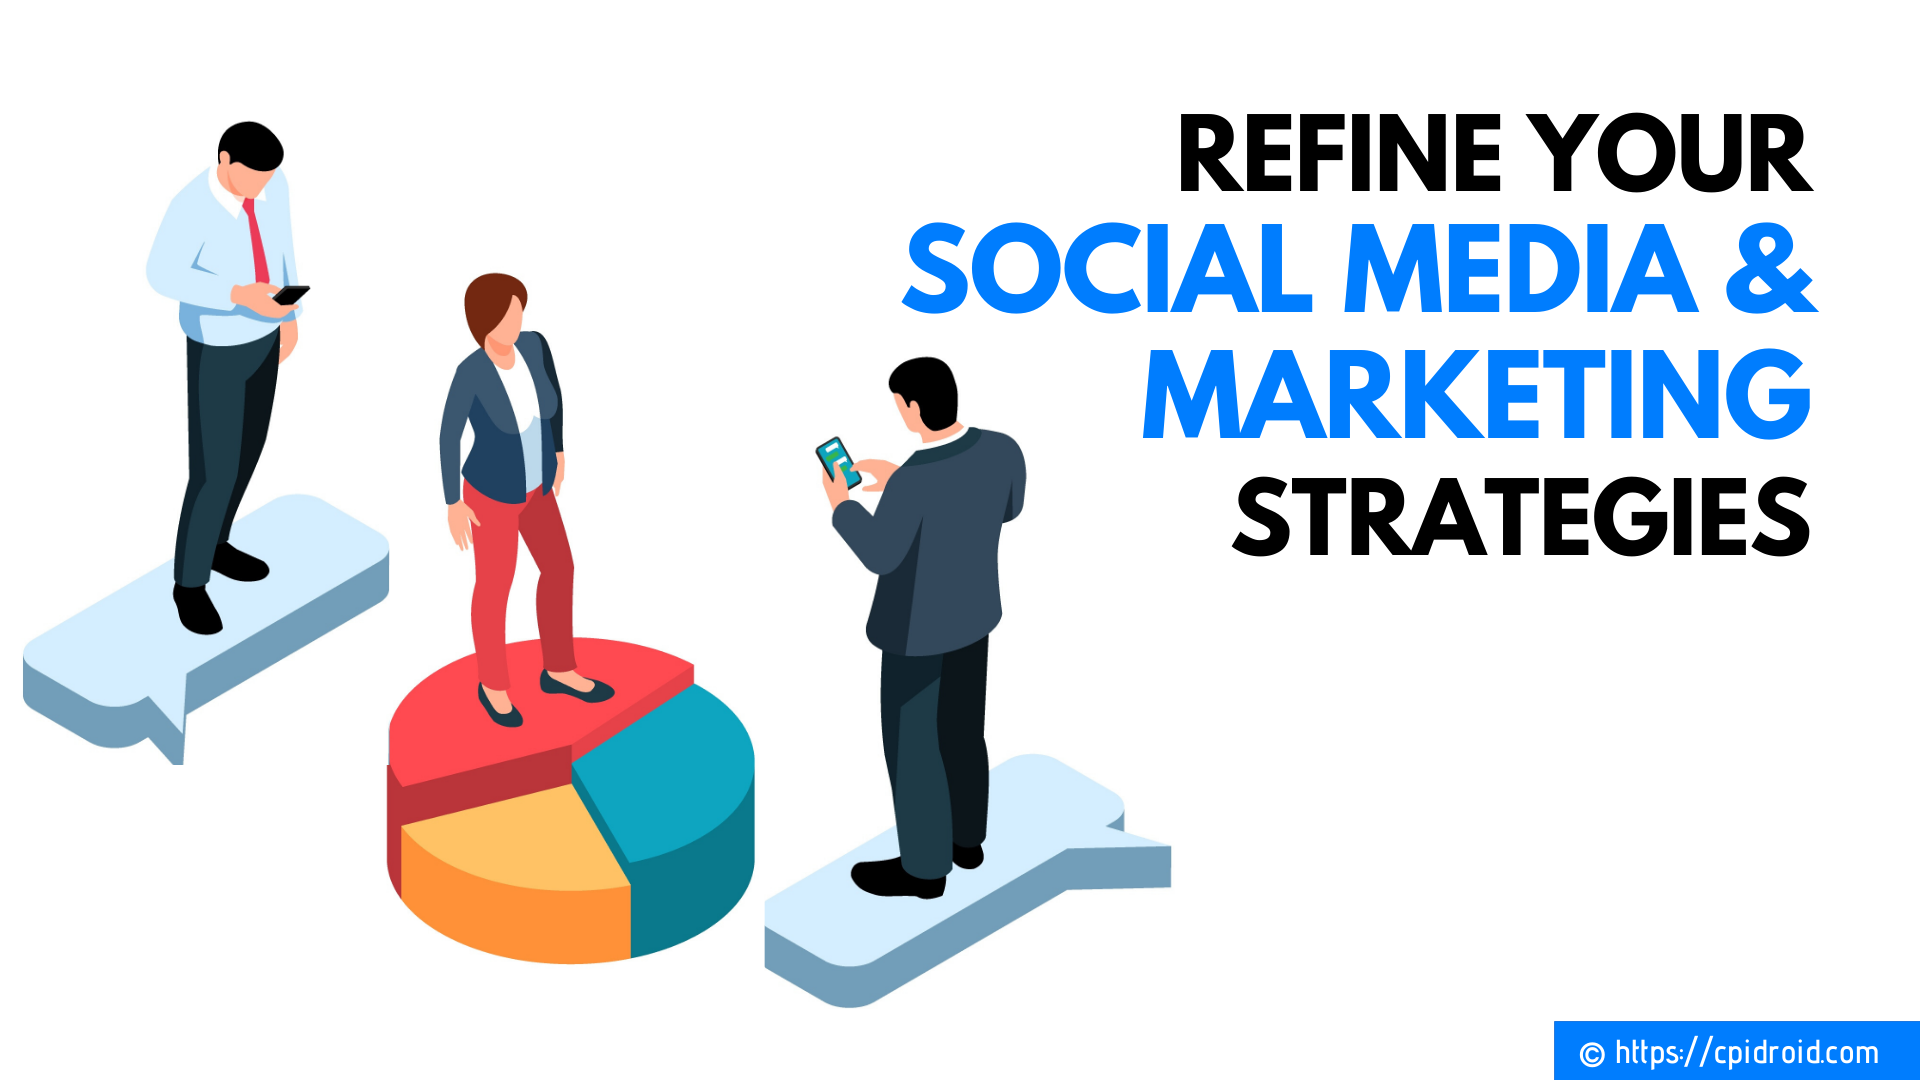 Refine your Social Media and Marketing Strategies